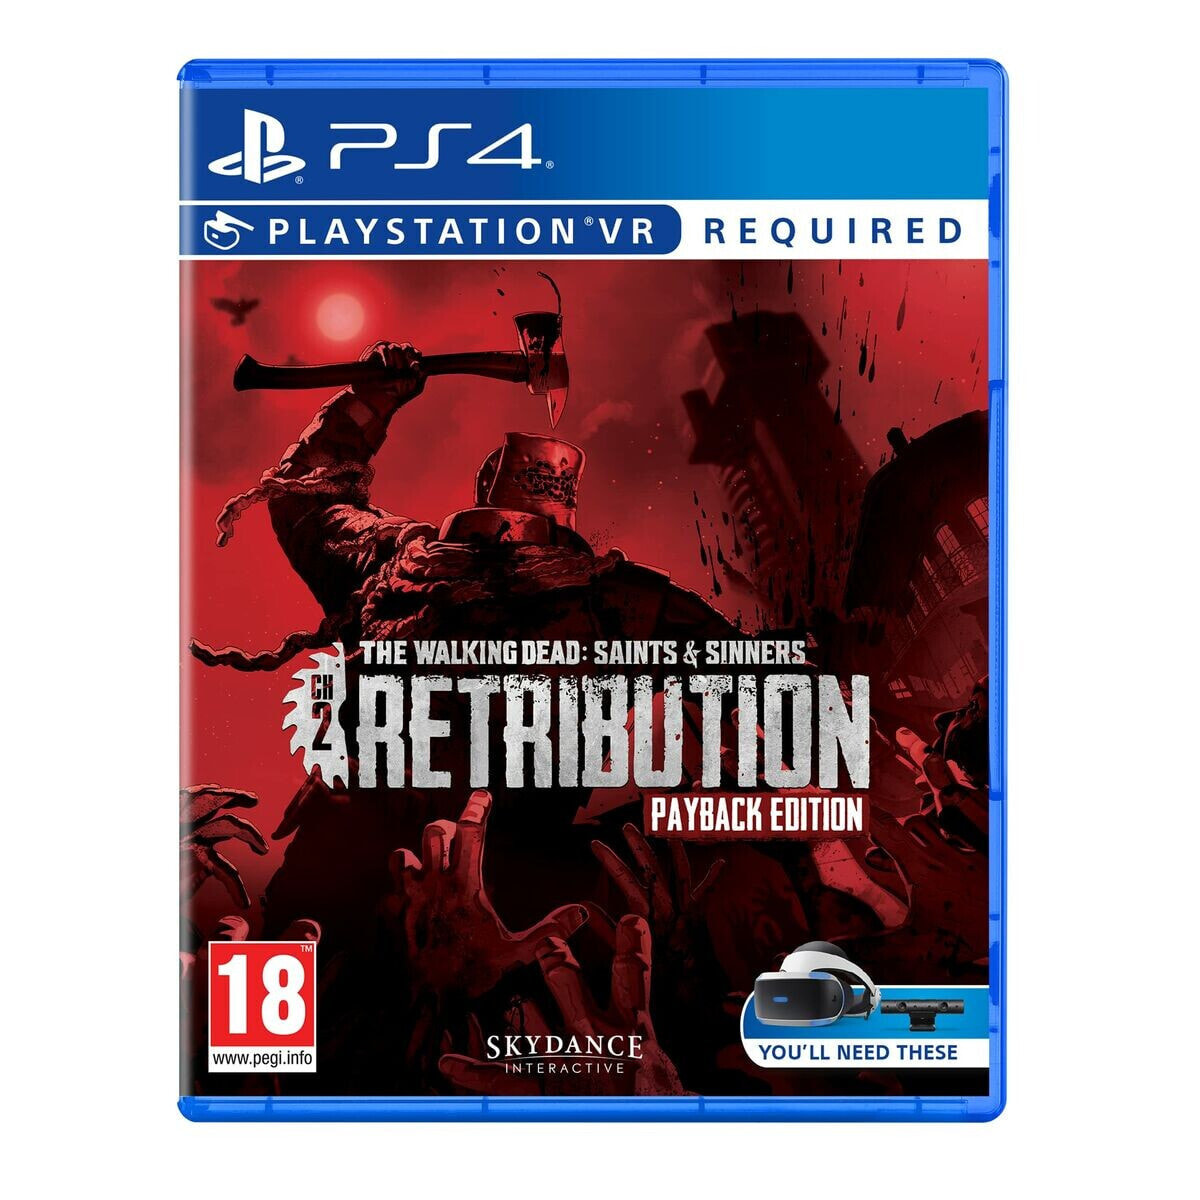 PlayStation 4 Video Game Just For Games The Walking Dead Saints & Sinners Chapter 2: Retribution - Payback Edition PlayStation V